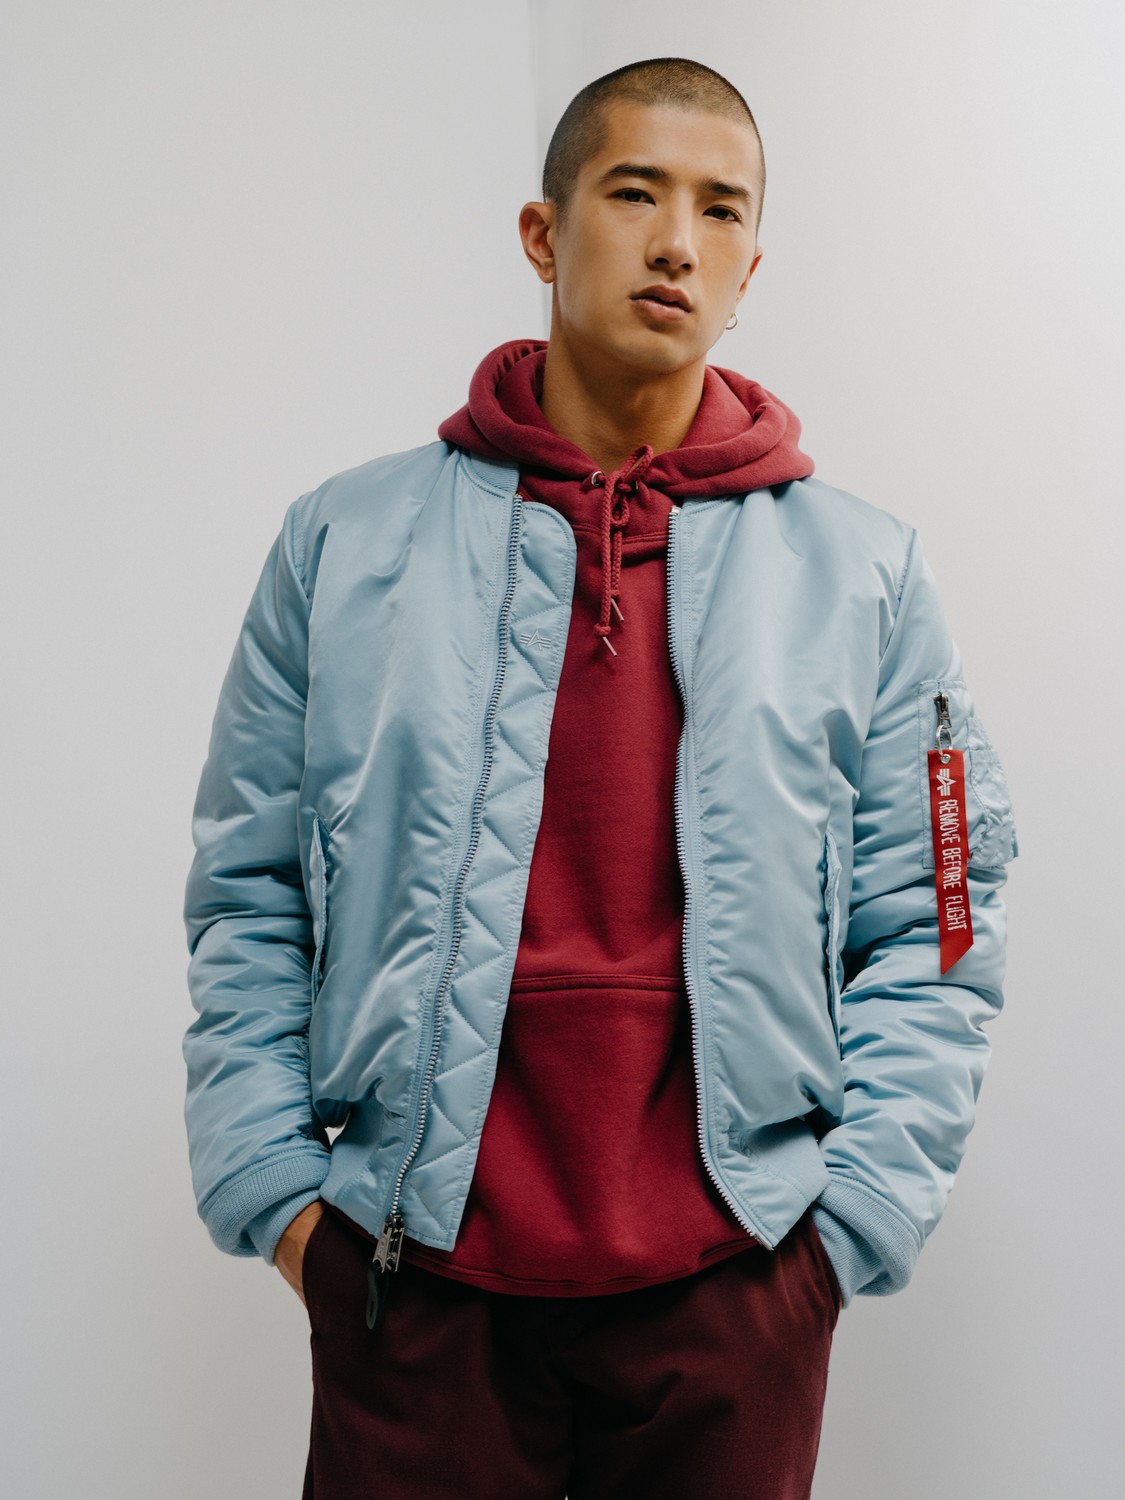 Urban Outfitters And Alpha Industries Announce Bomber Project Featuring